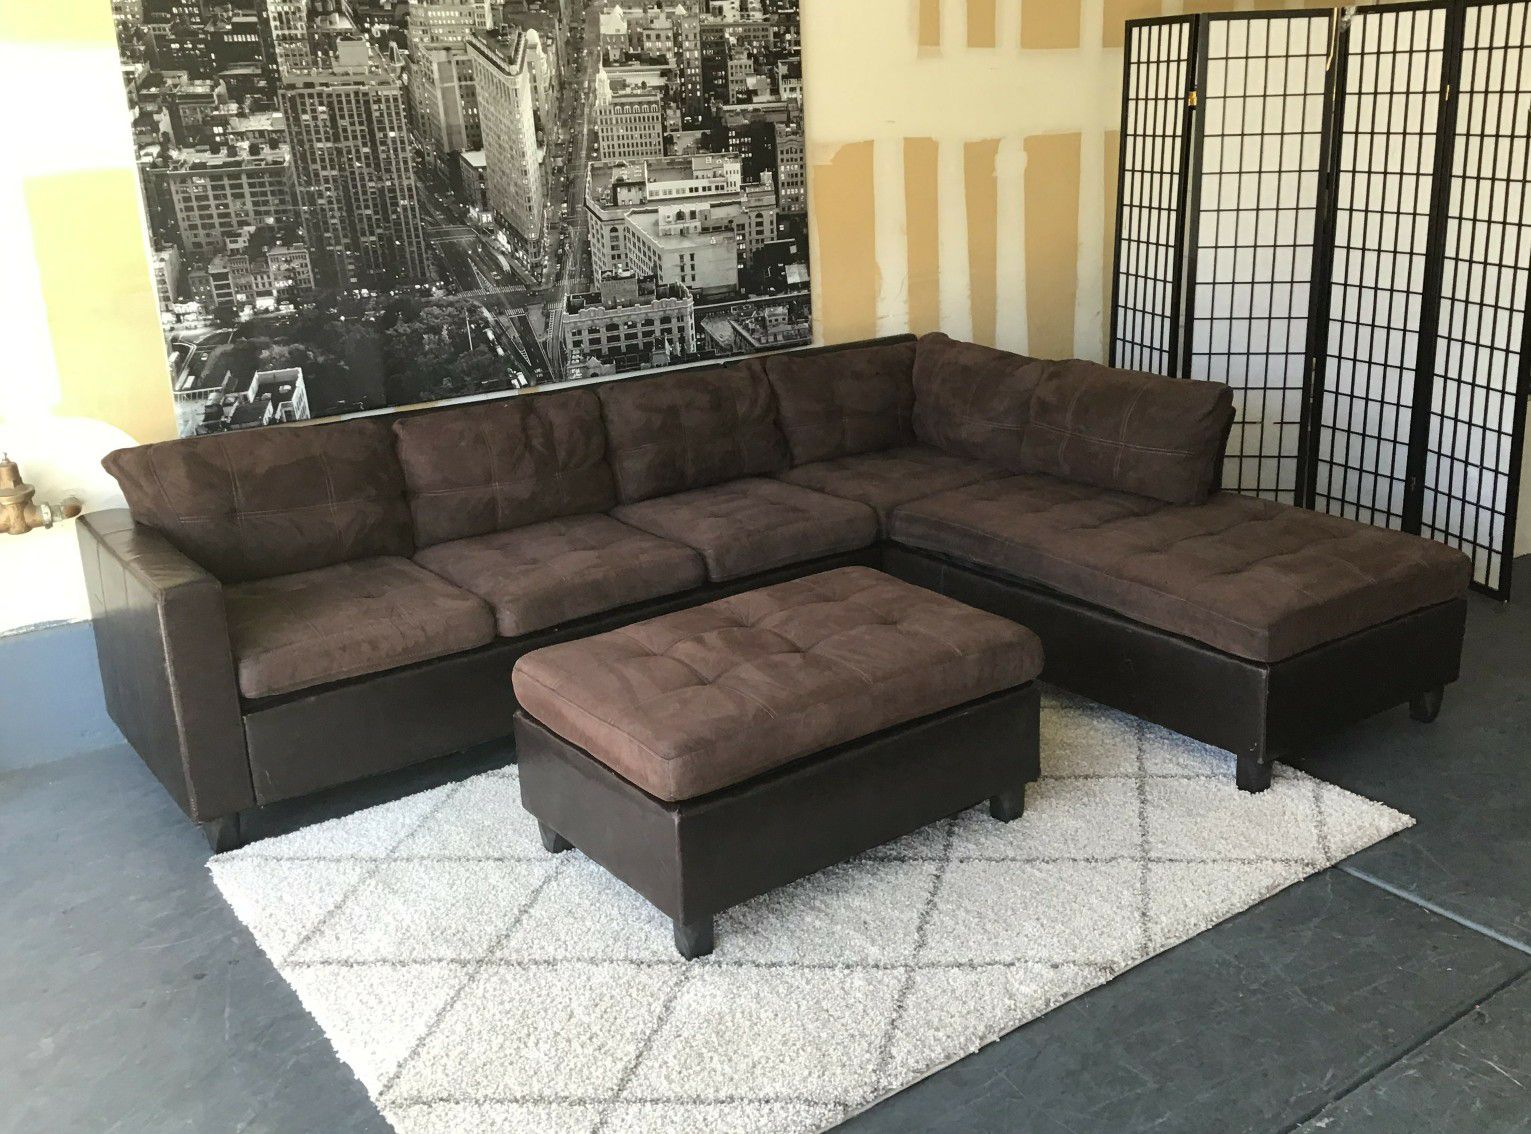 Nice brown sectional sofa with ottoman • Good condition • Free delivery